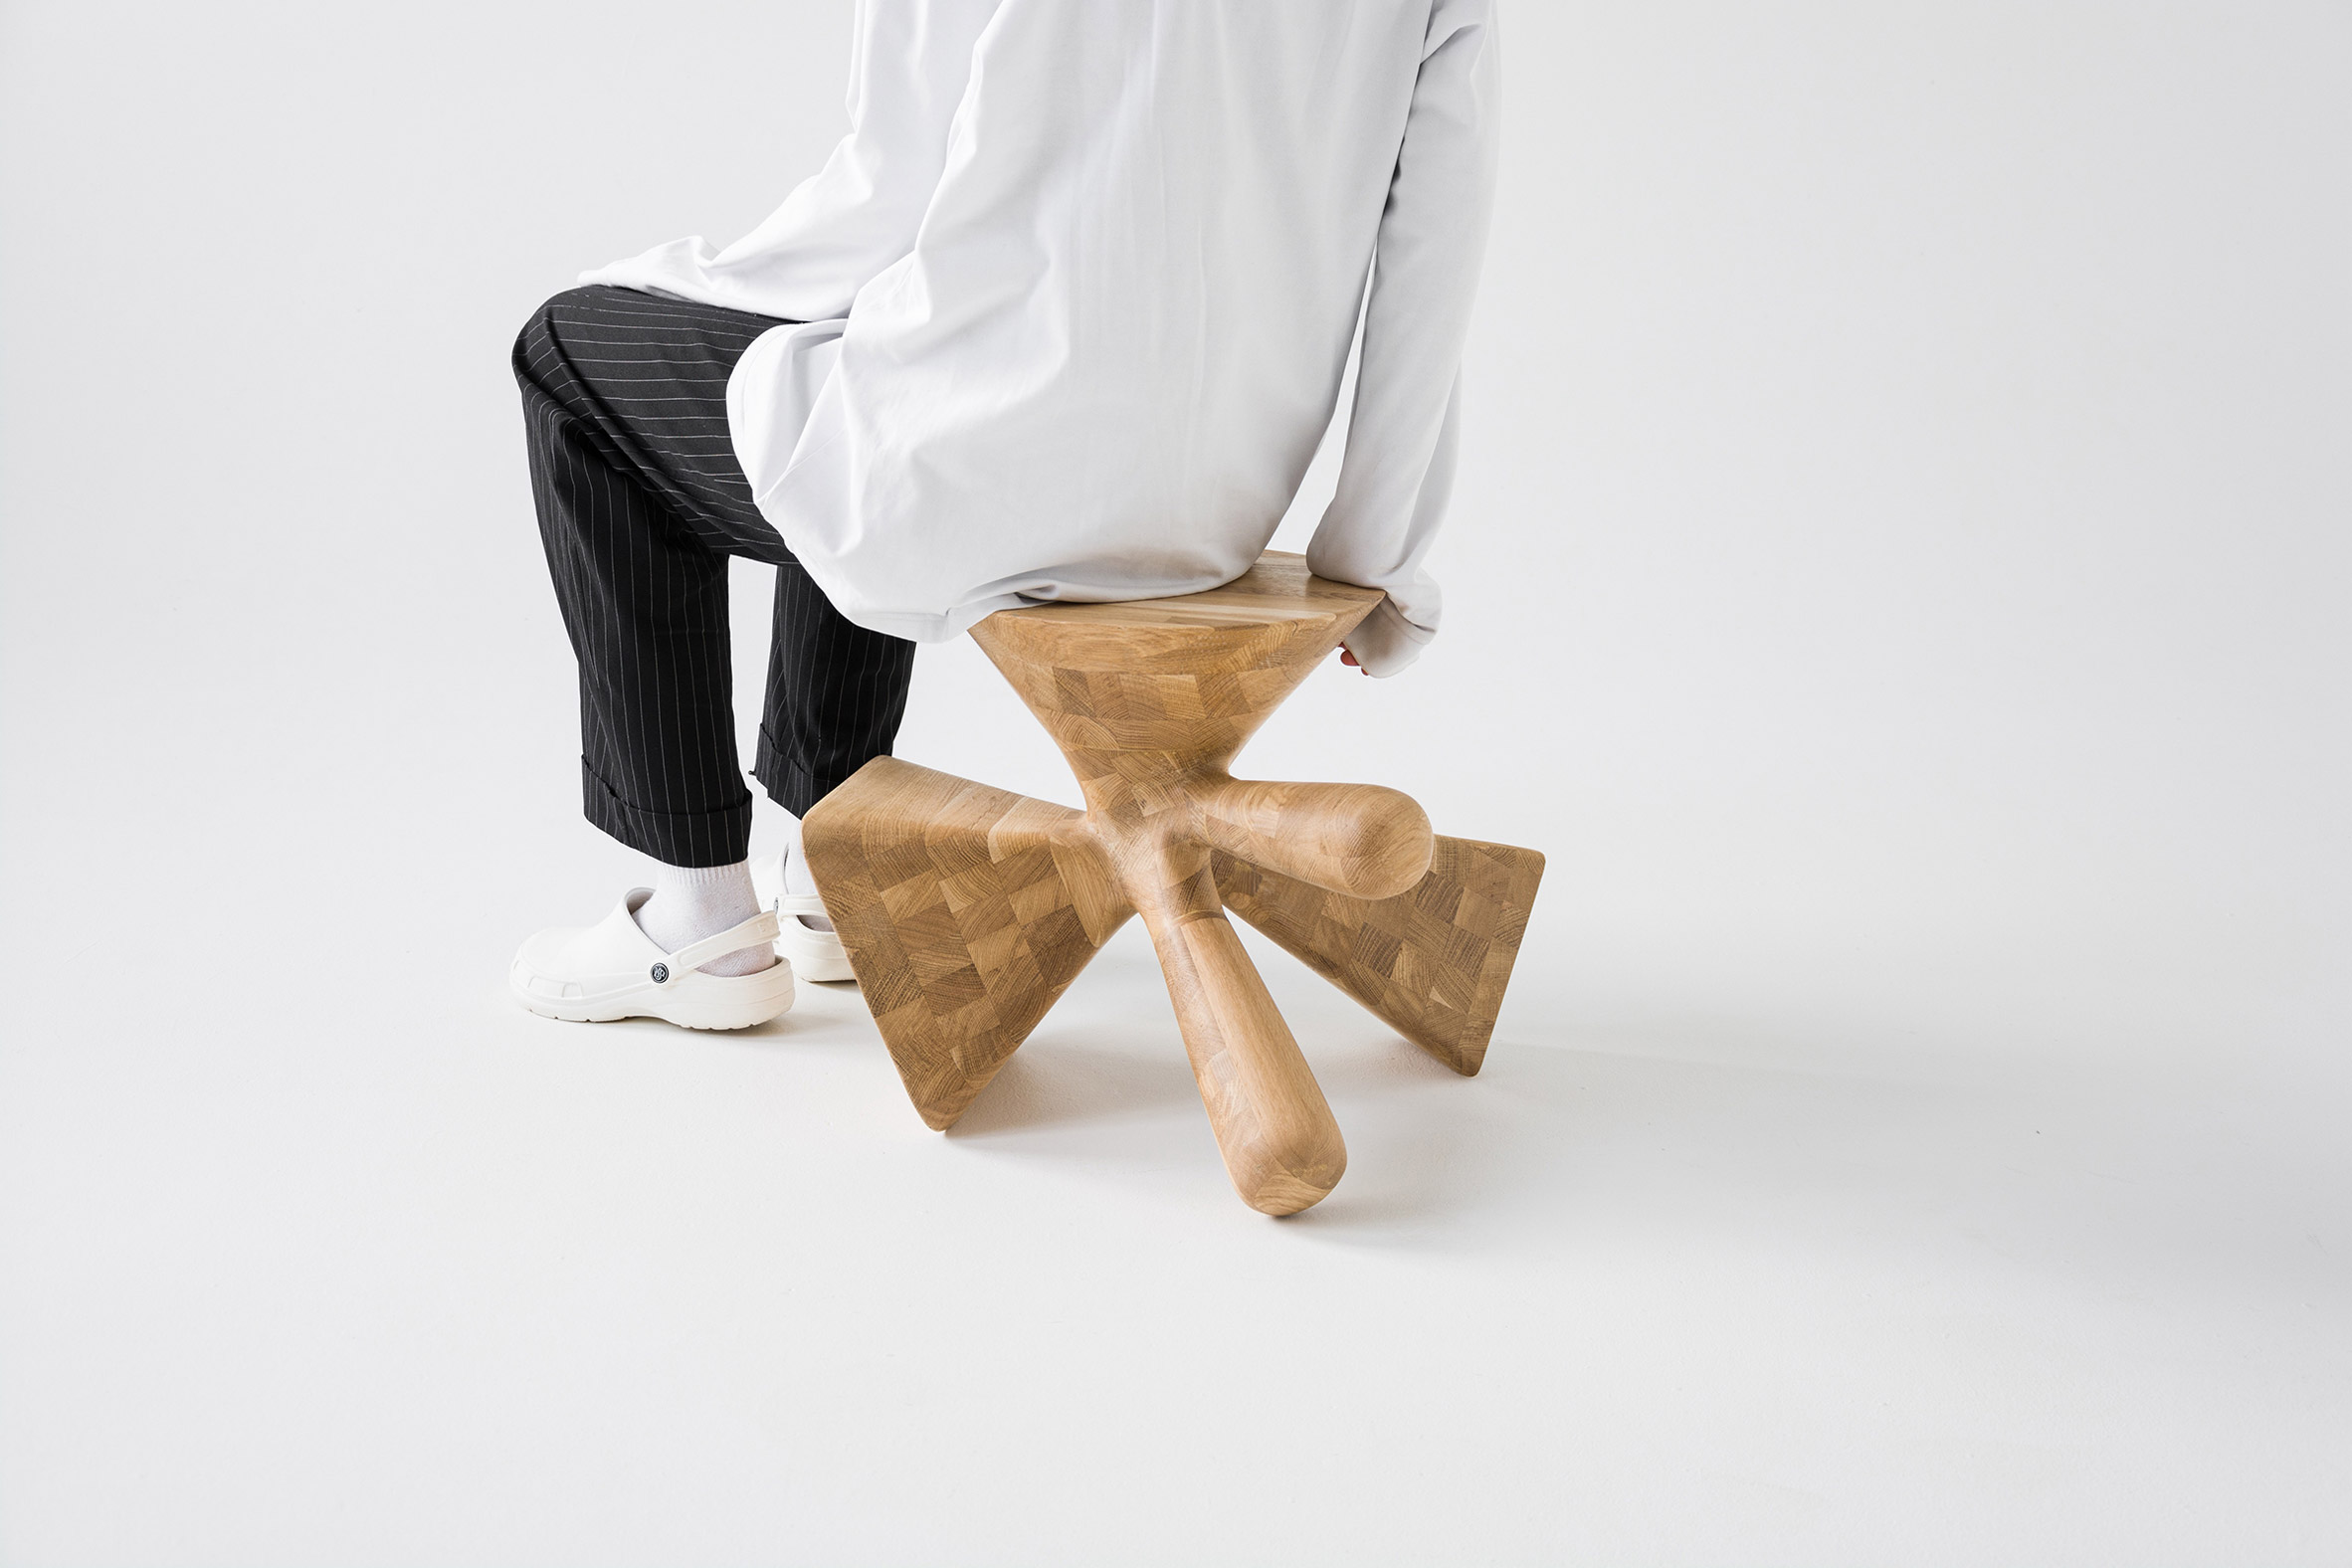 Multifaceted wooden furniture by Kosmos Architects